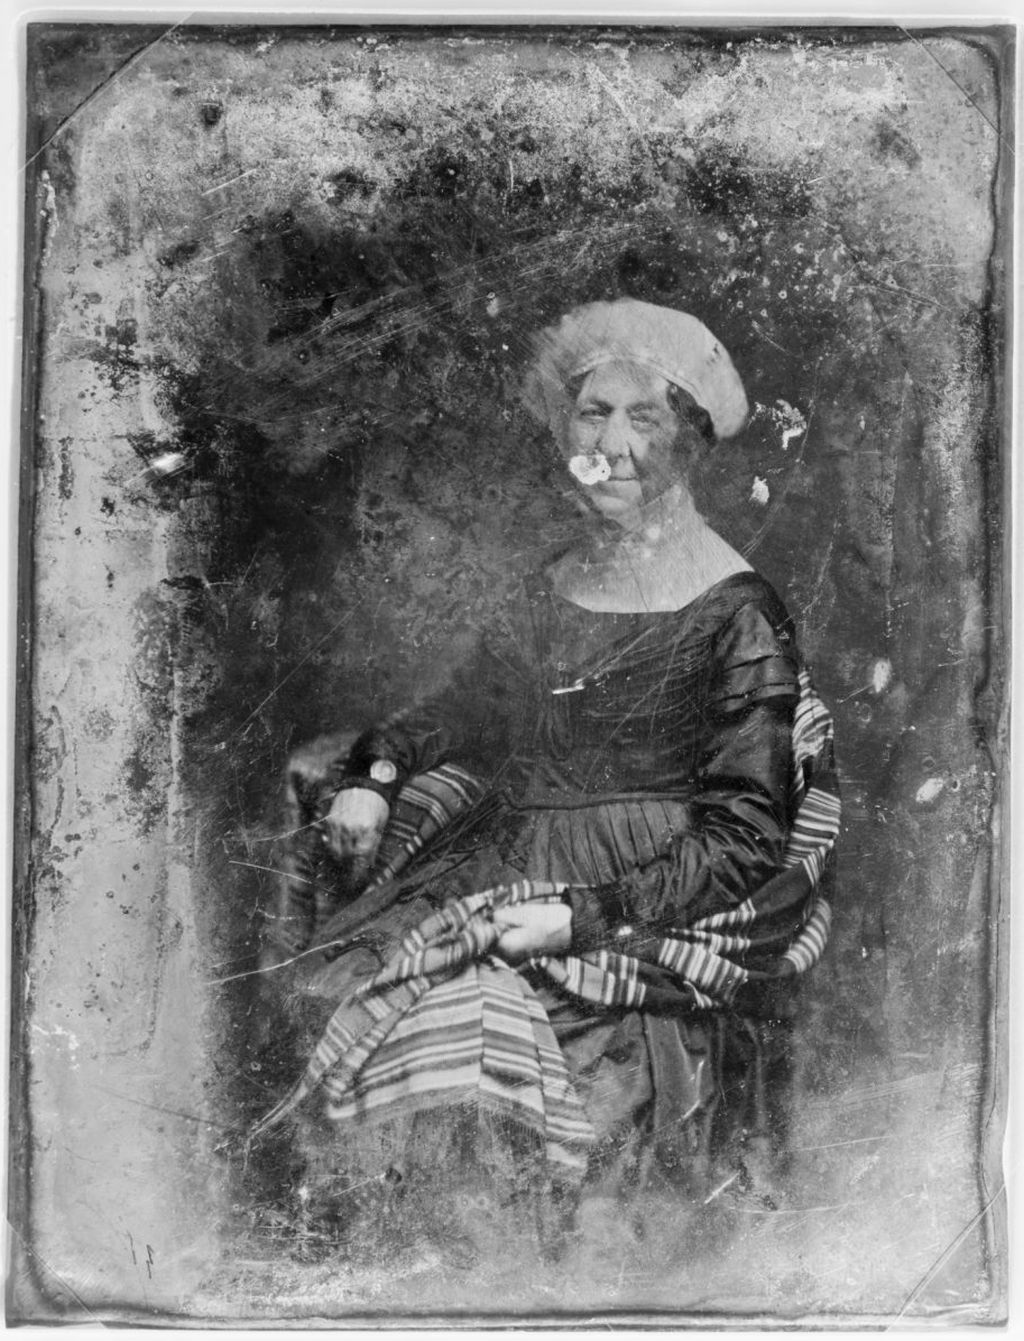 A young Matthew Brady made a daguerreotype of Dolley Madison in 1848. Library of Congress.